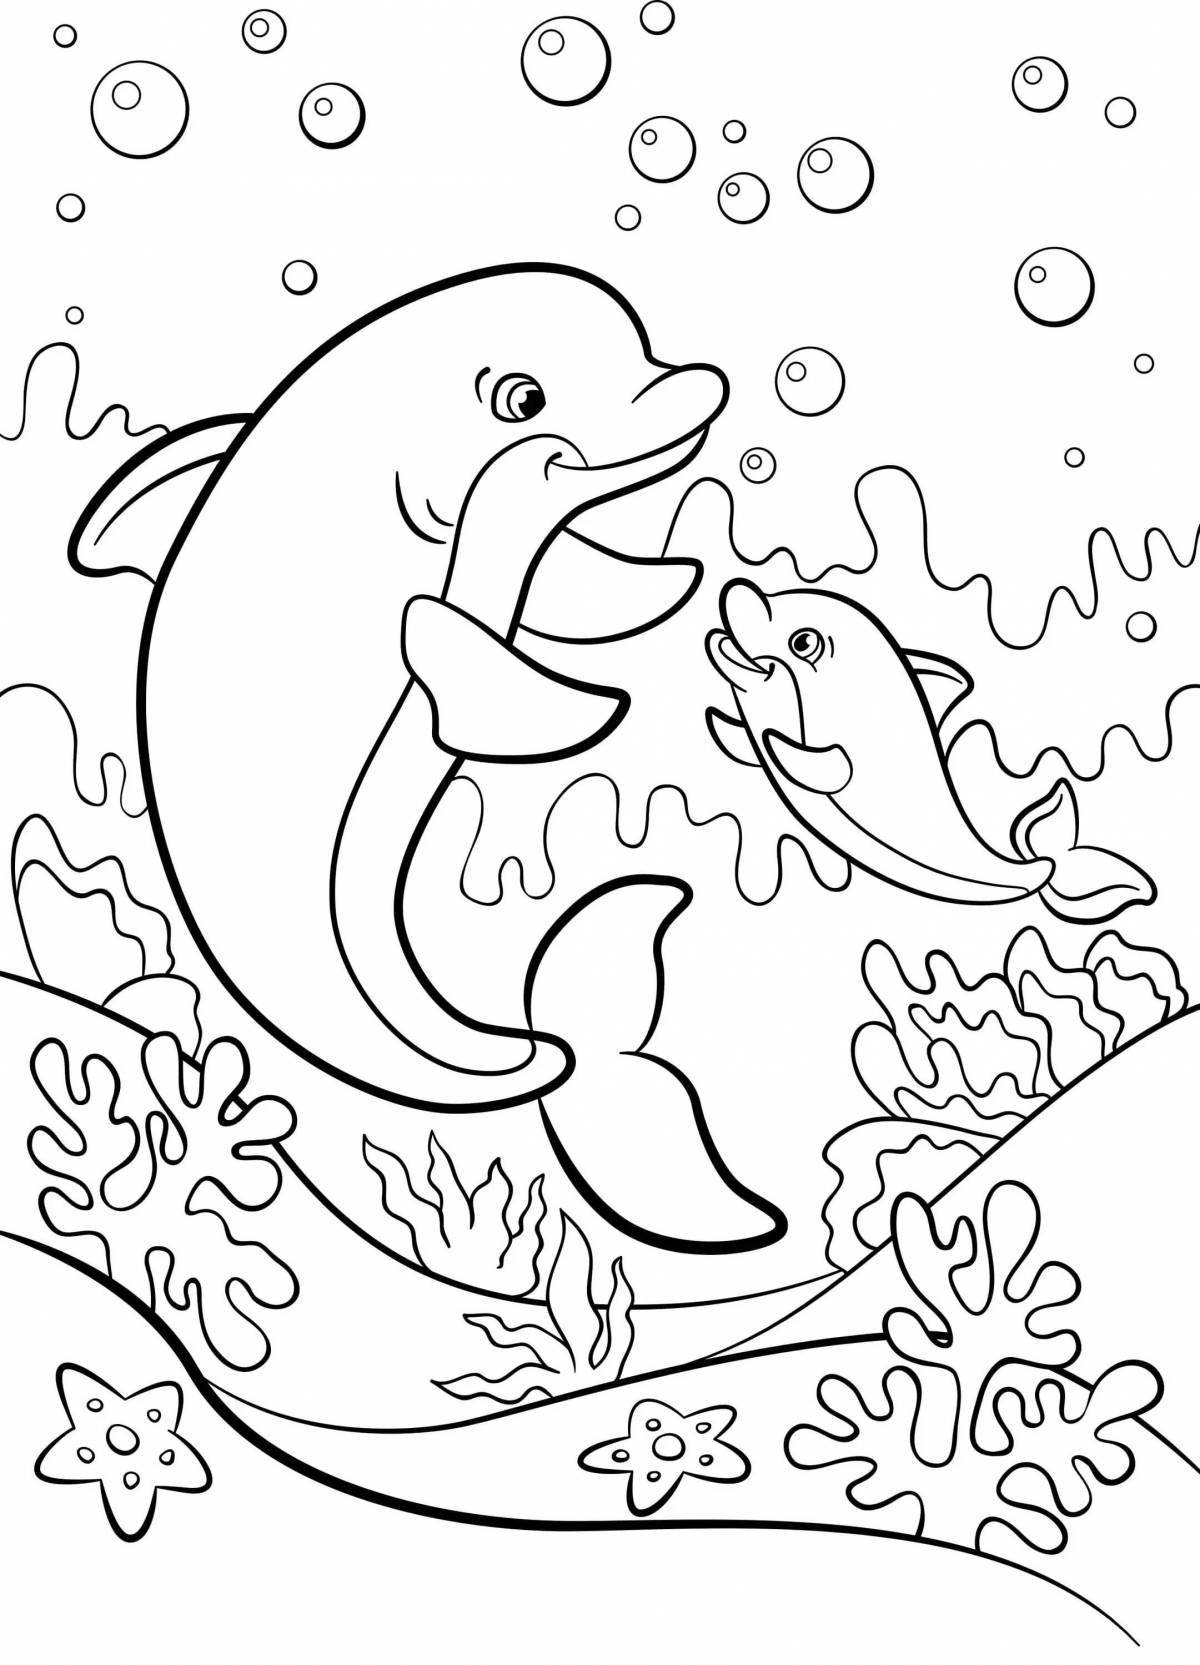 Glitter dolphin coloring page